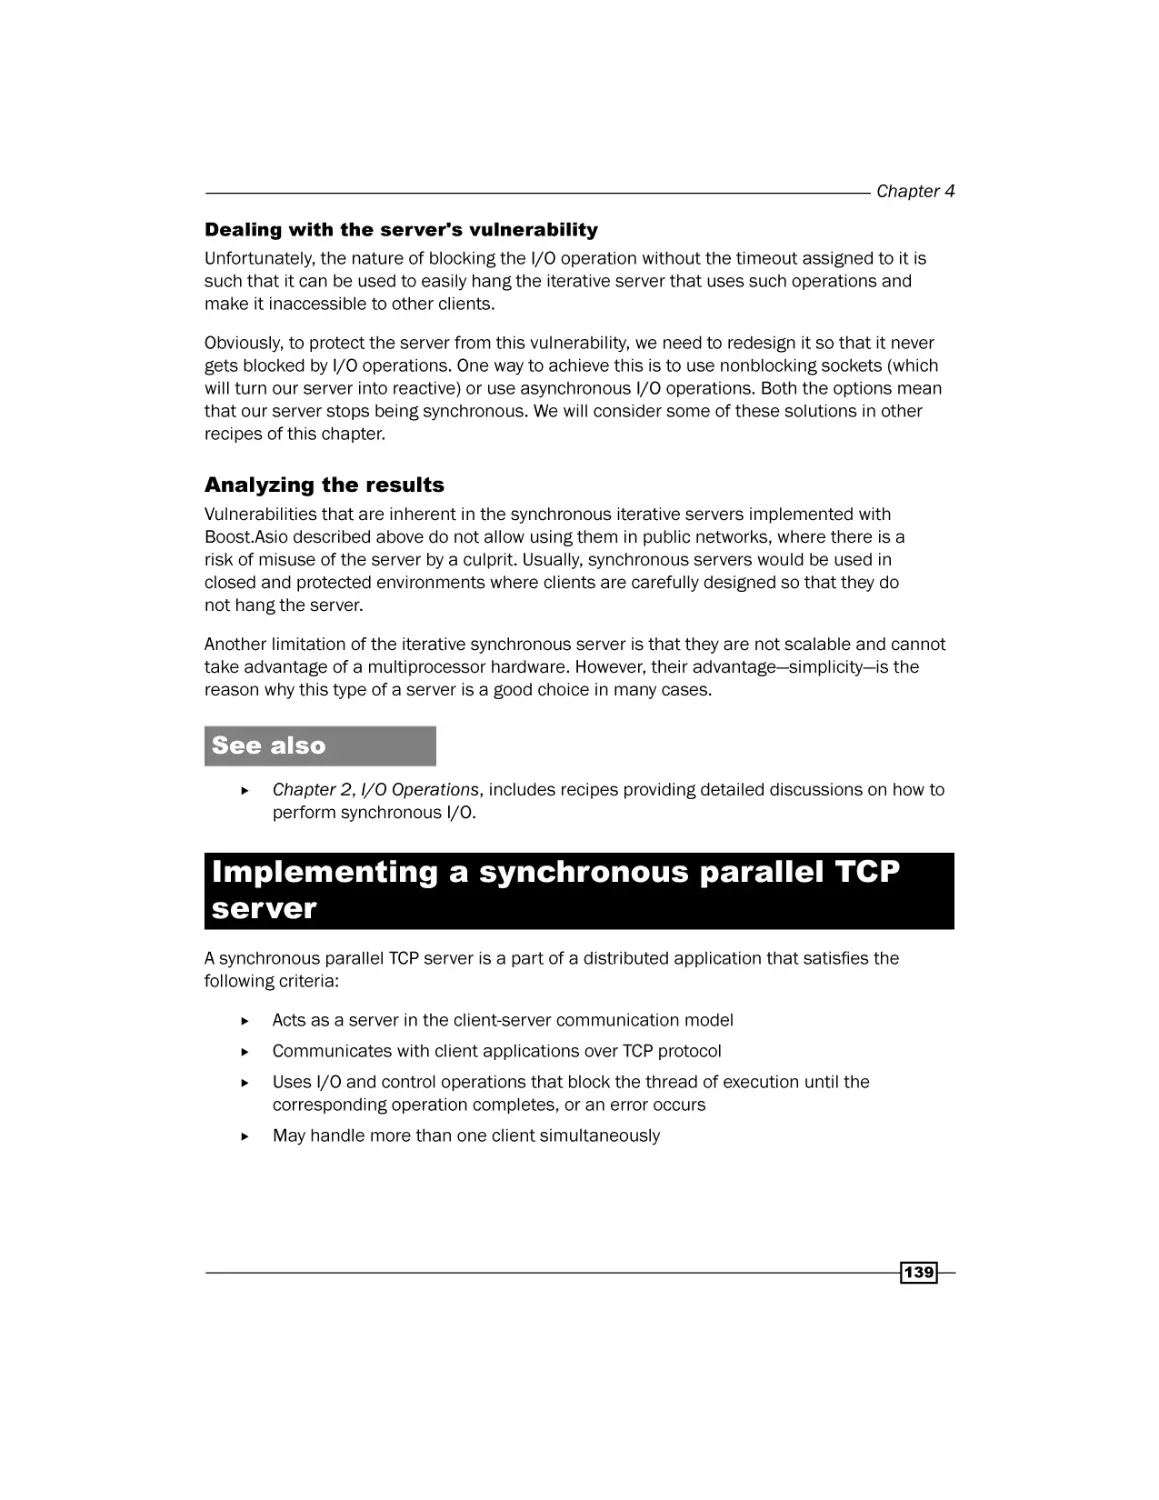 Implementing a synchronous parallel TCP server